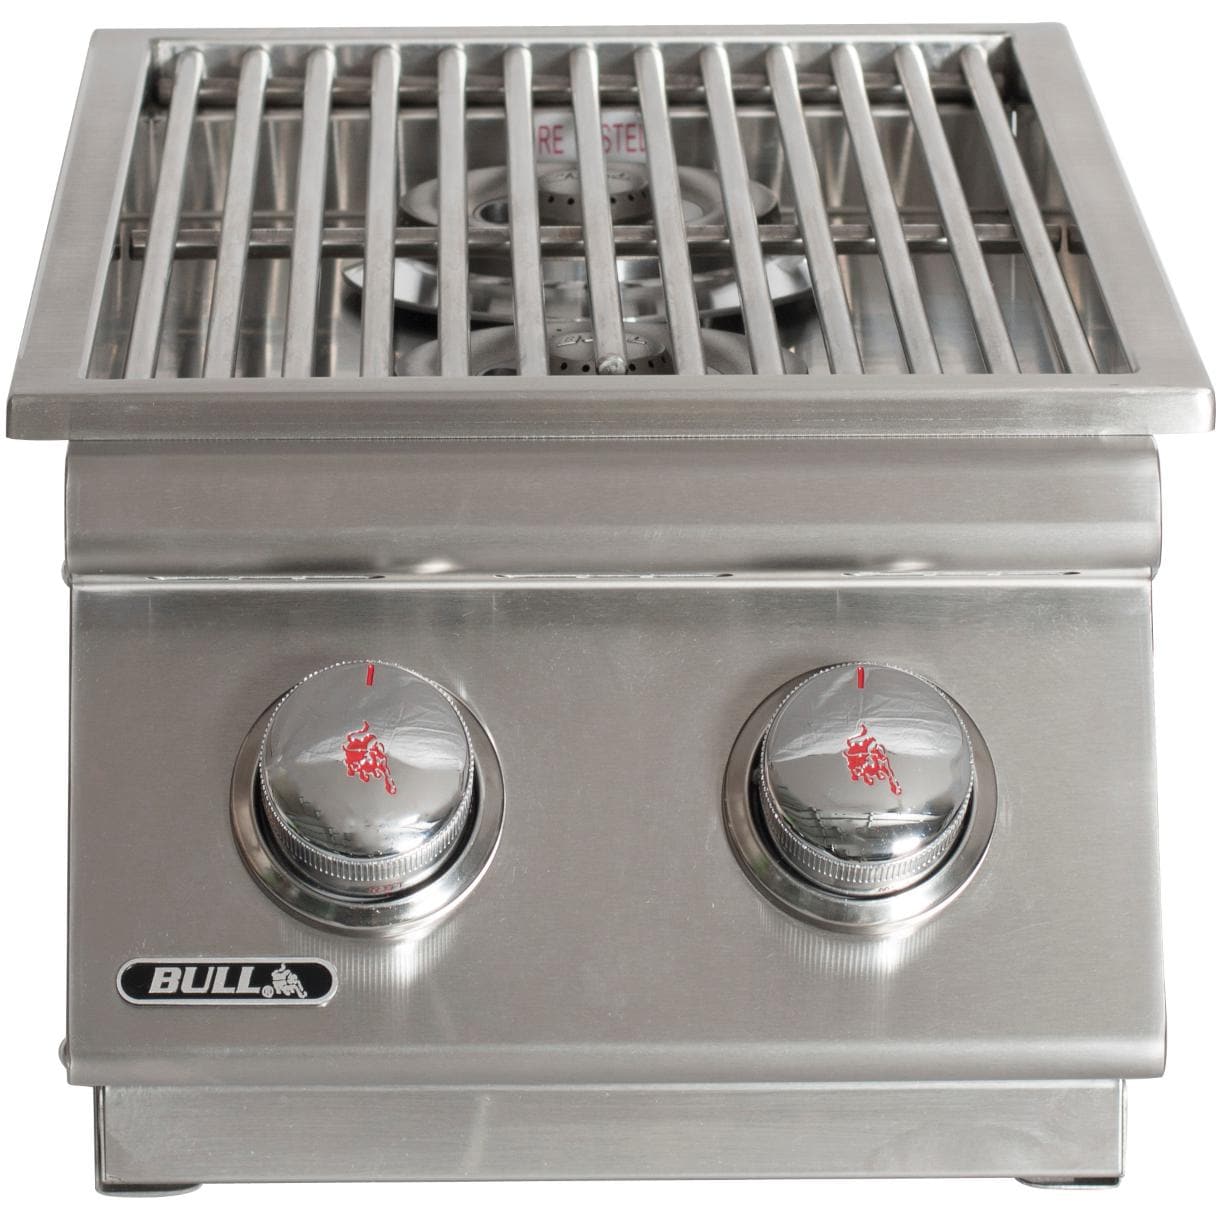 Bull Outdoor Products Stainless Steel 22,000 BTUs Slide-In Double Side Burner - image 2 of 5